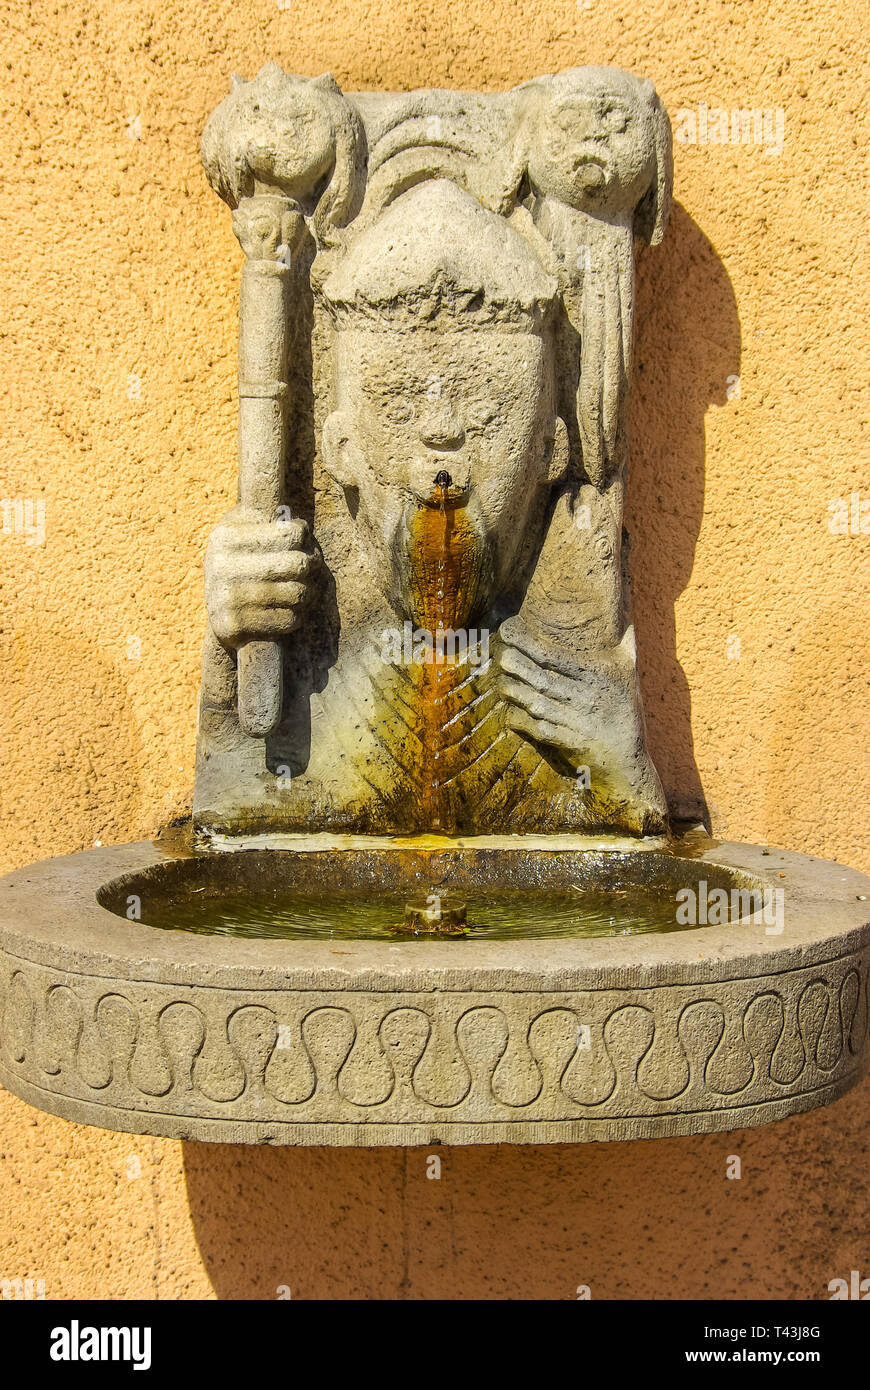 Historic drinking water fountain attached to an old house facade on Konzil Street in Konstanz at Lake Constance, Baden-Wurttemberg, Germany, Europe. Stock Photo